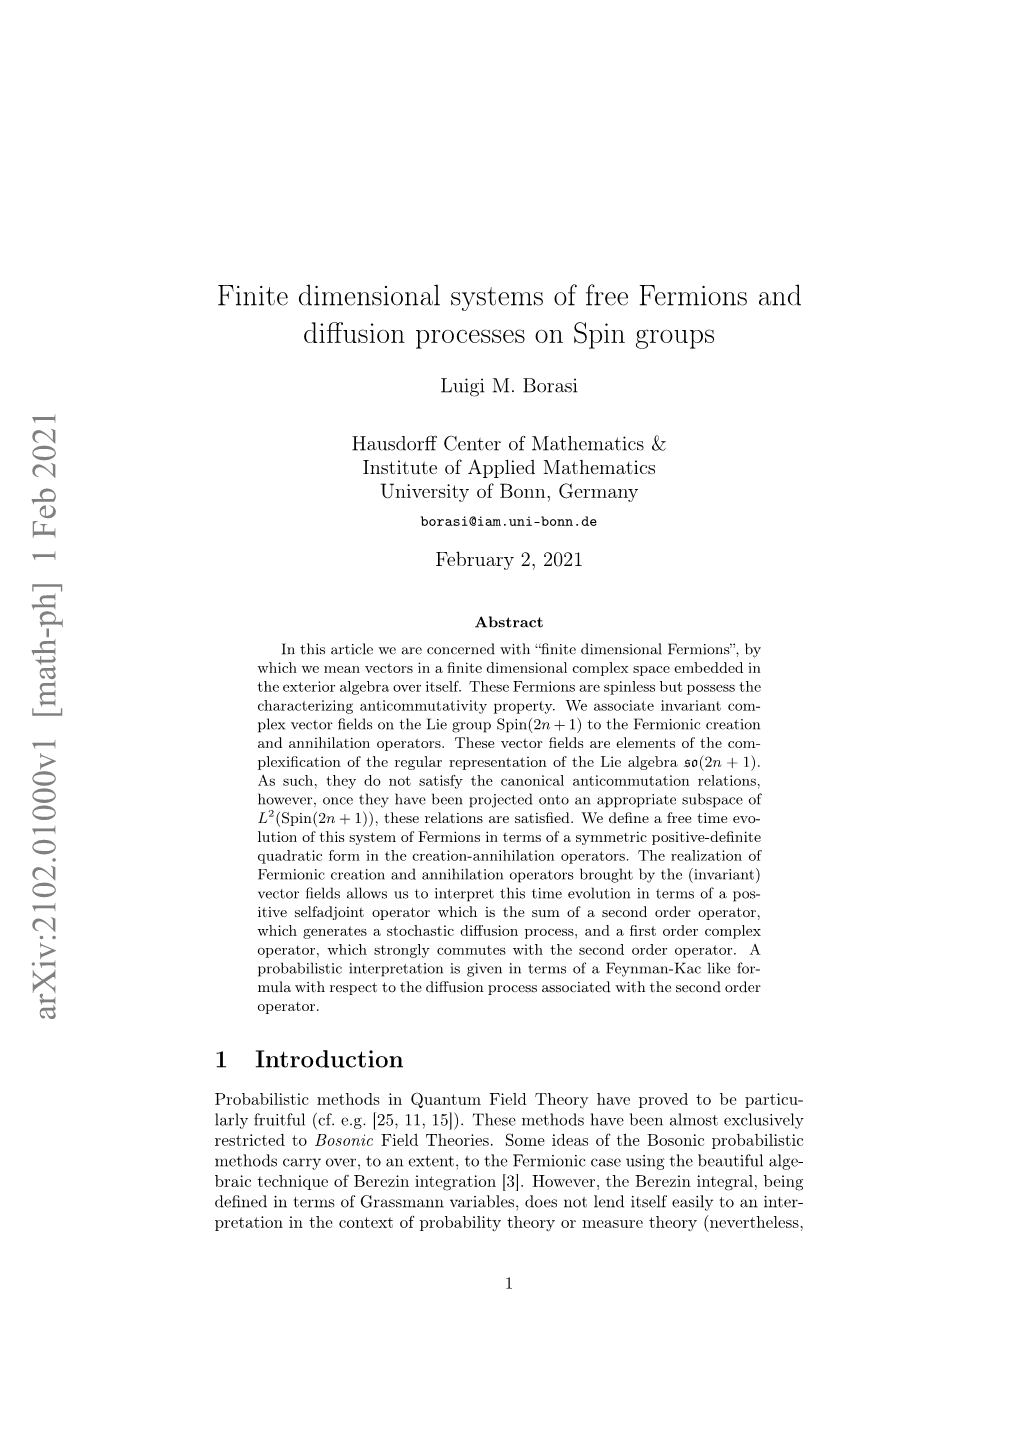 Finite Dimensional Systems of Free Fermions and Diffusion Processes